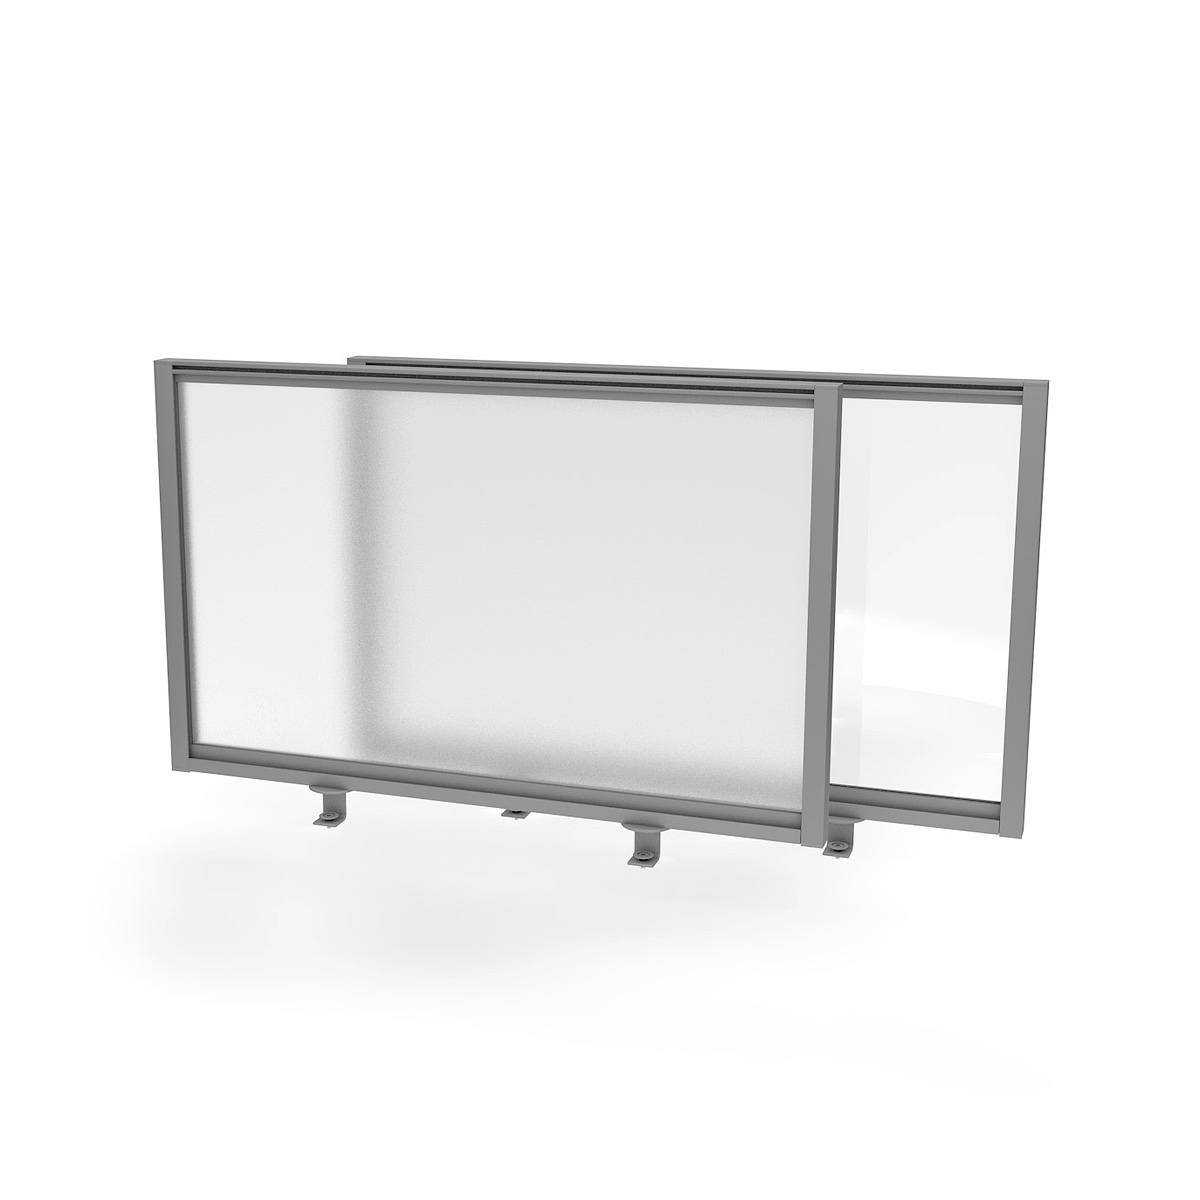 FRONTIER® Glazed Office Screen Desk Dividers With Frosted or Clear Perspex® Panels